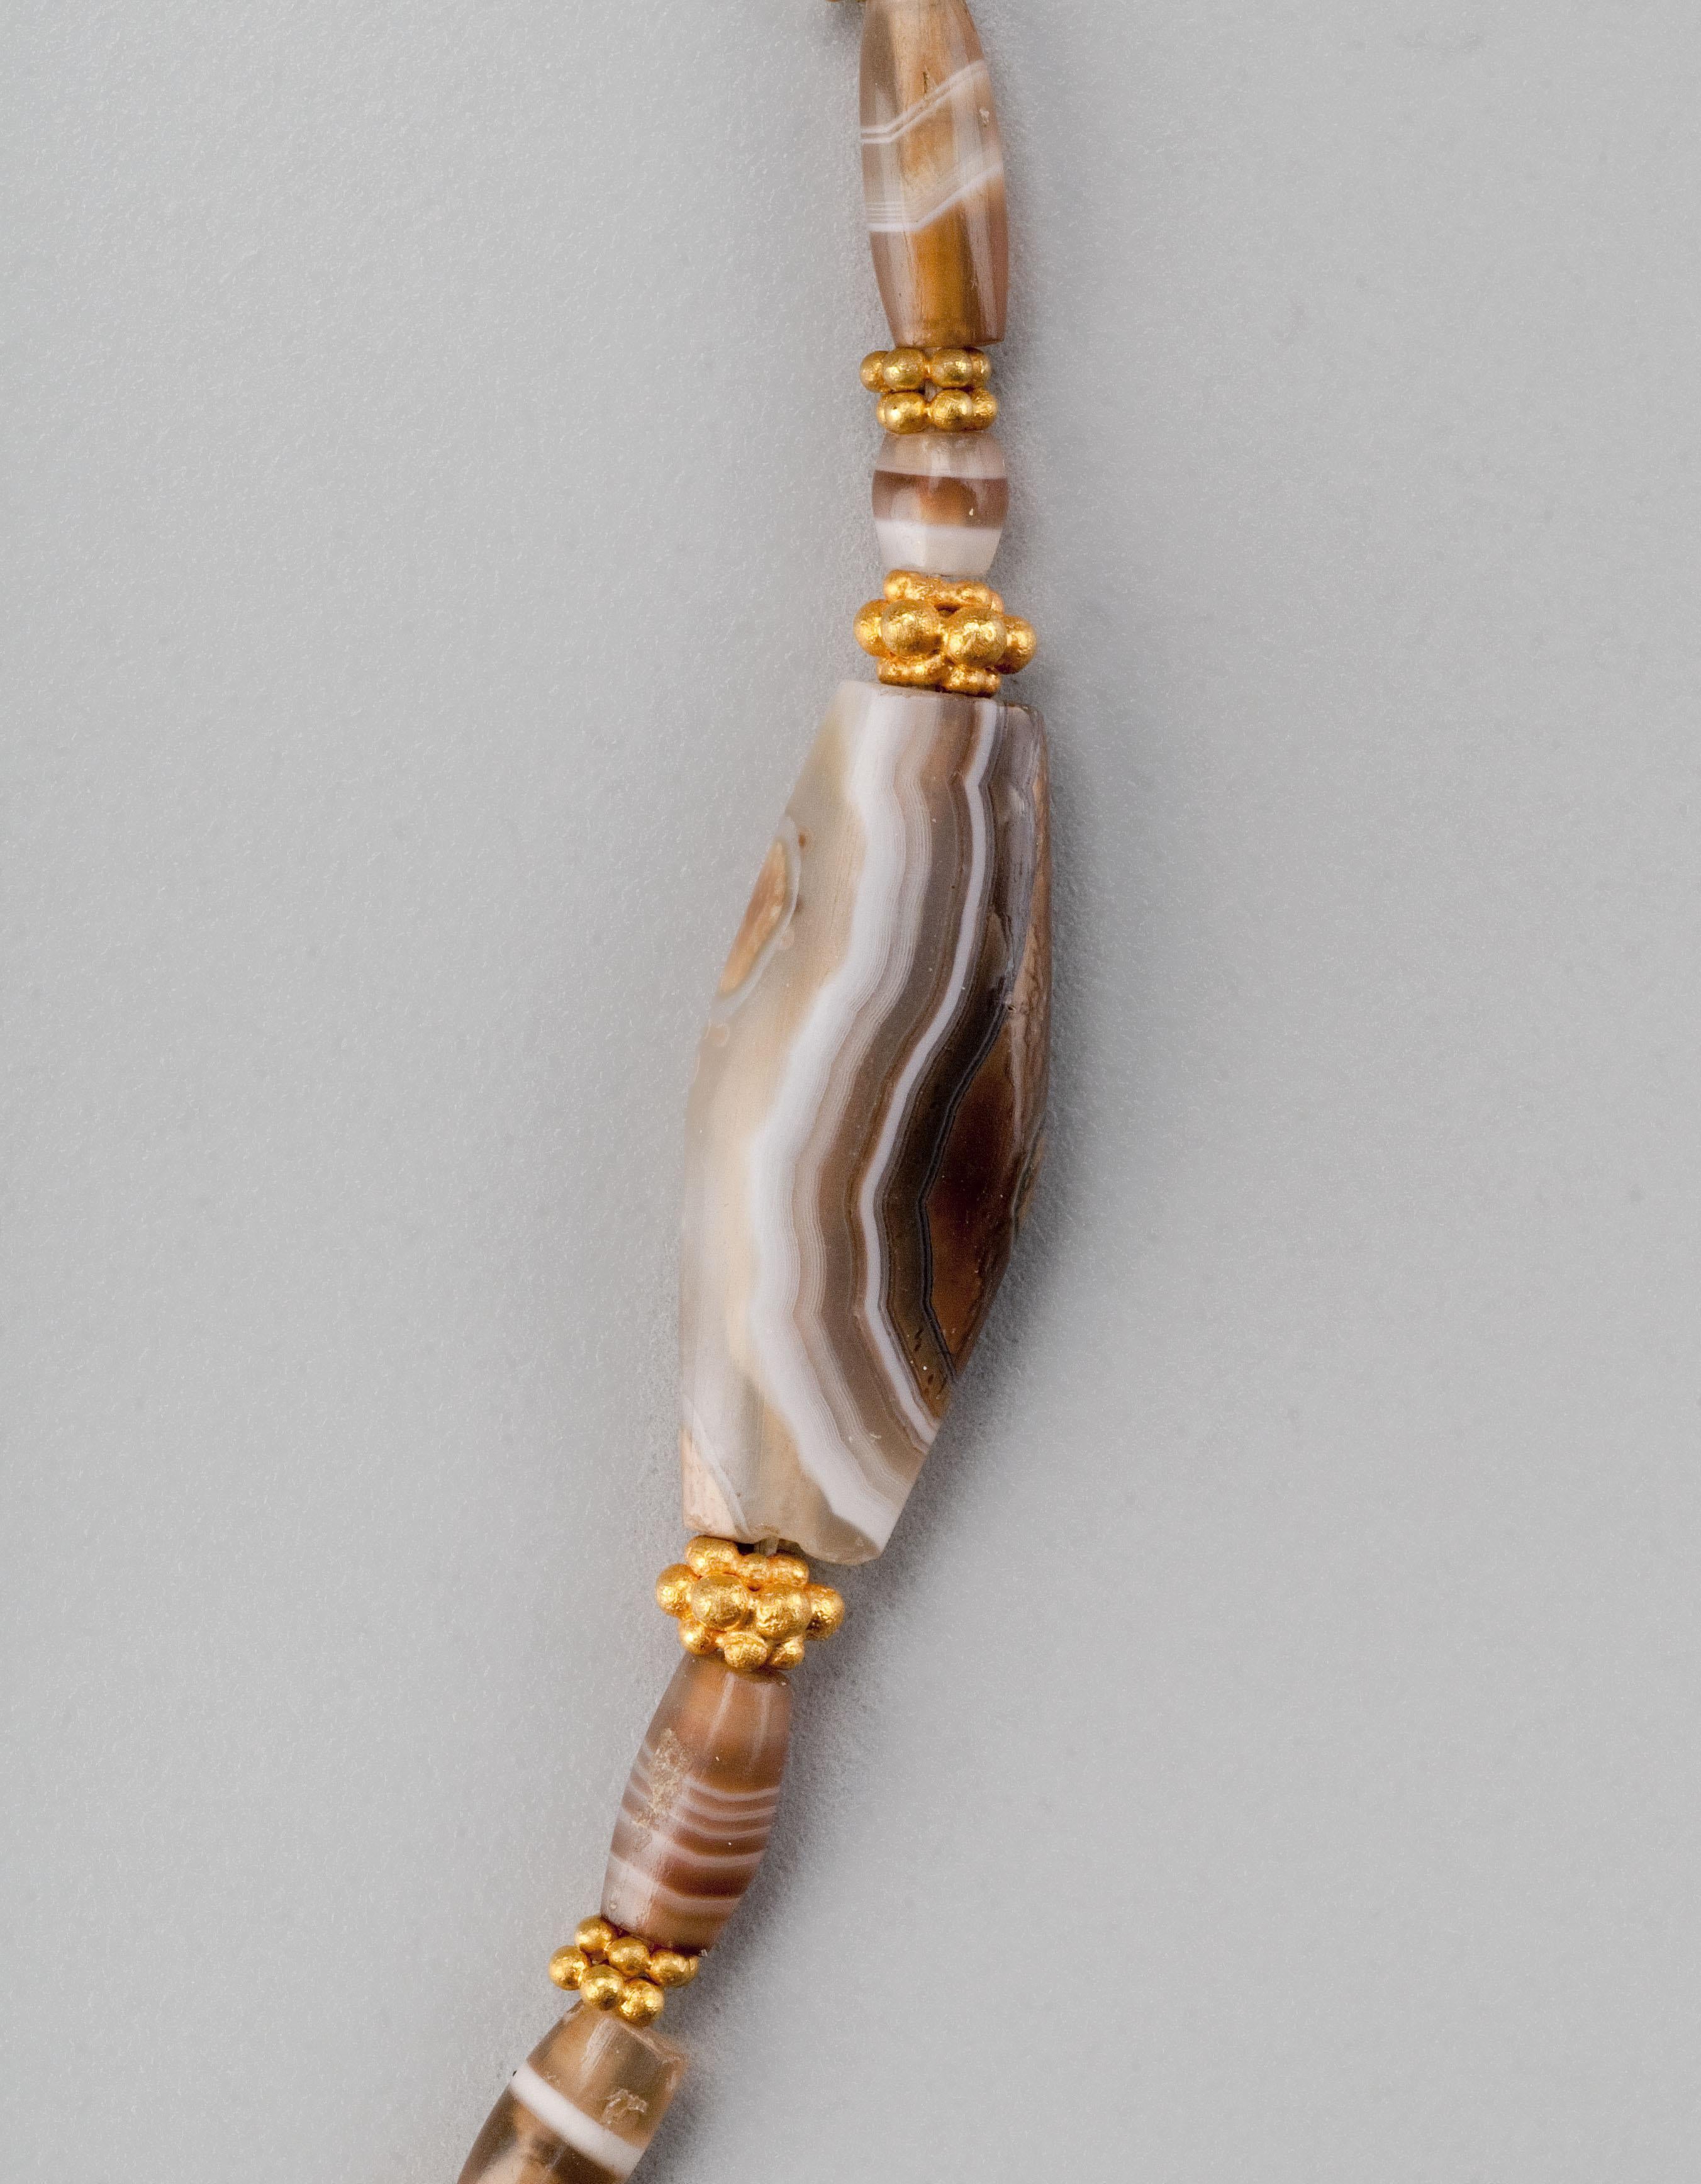 Ensemble of Ancient Agate Bead Necklaces, 22k Granulated Gold Beads, and Clasp For Sale 1